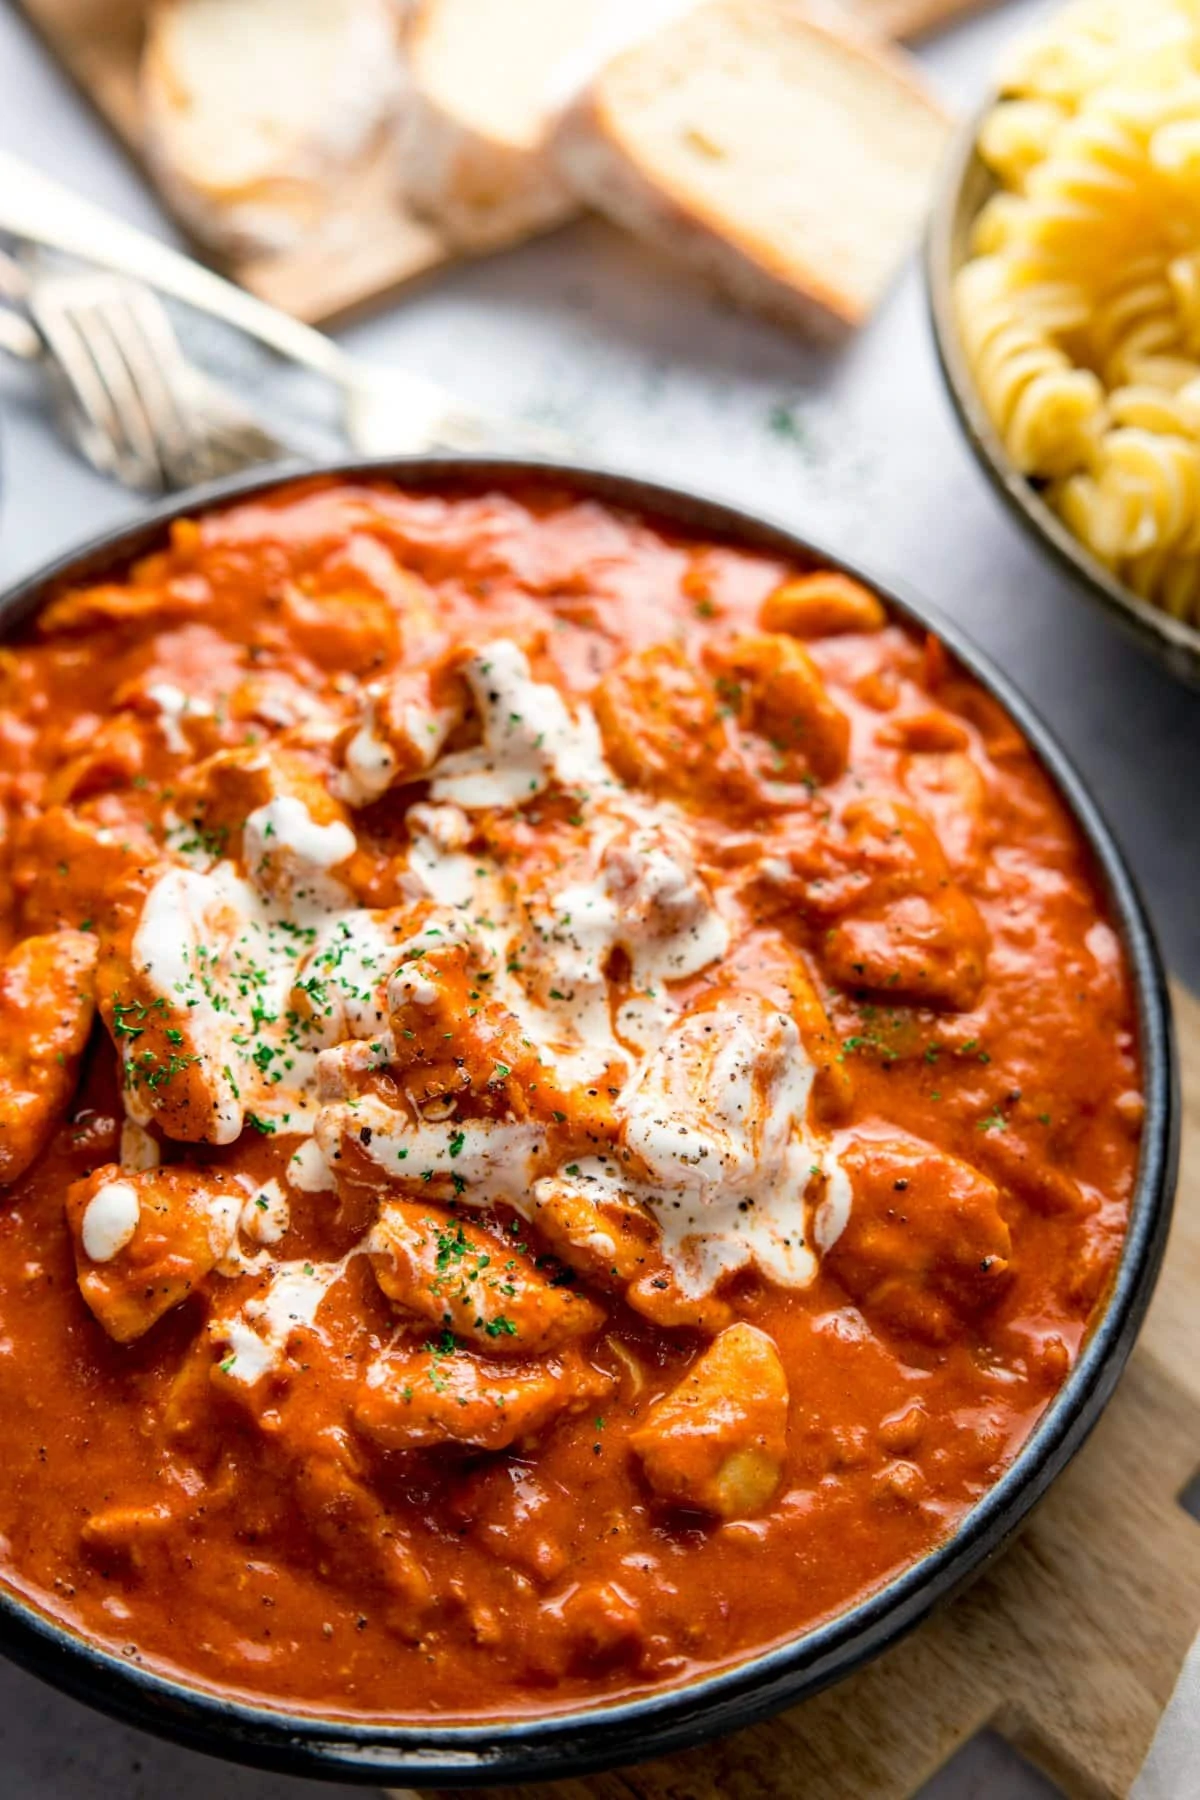 Dark bowl filled with chicken paprikash and topped with a swirl of soured cream. Bowl is on a light background and there are side dishes of bread and pasta just in shot.